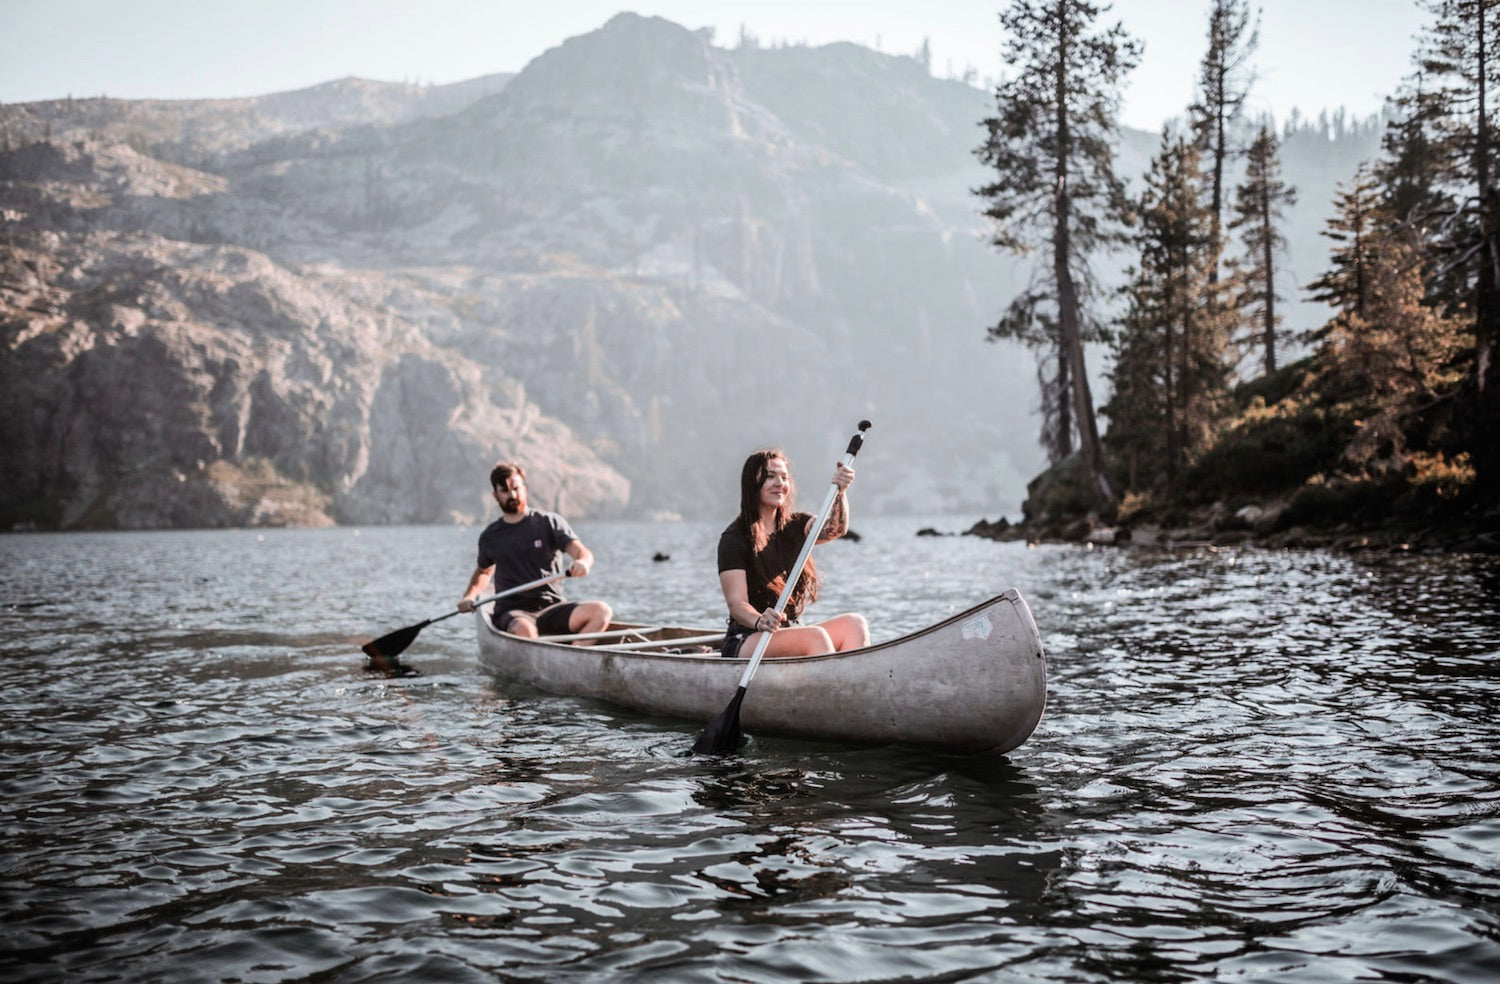 A couple canoeing together in a lake during their unforgettable summer.